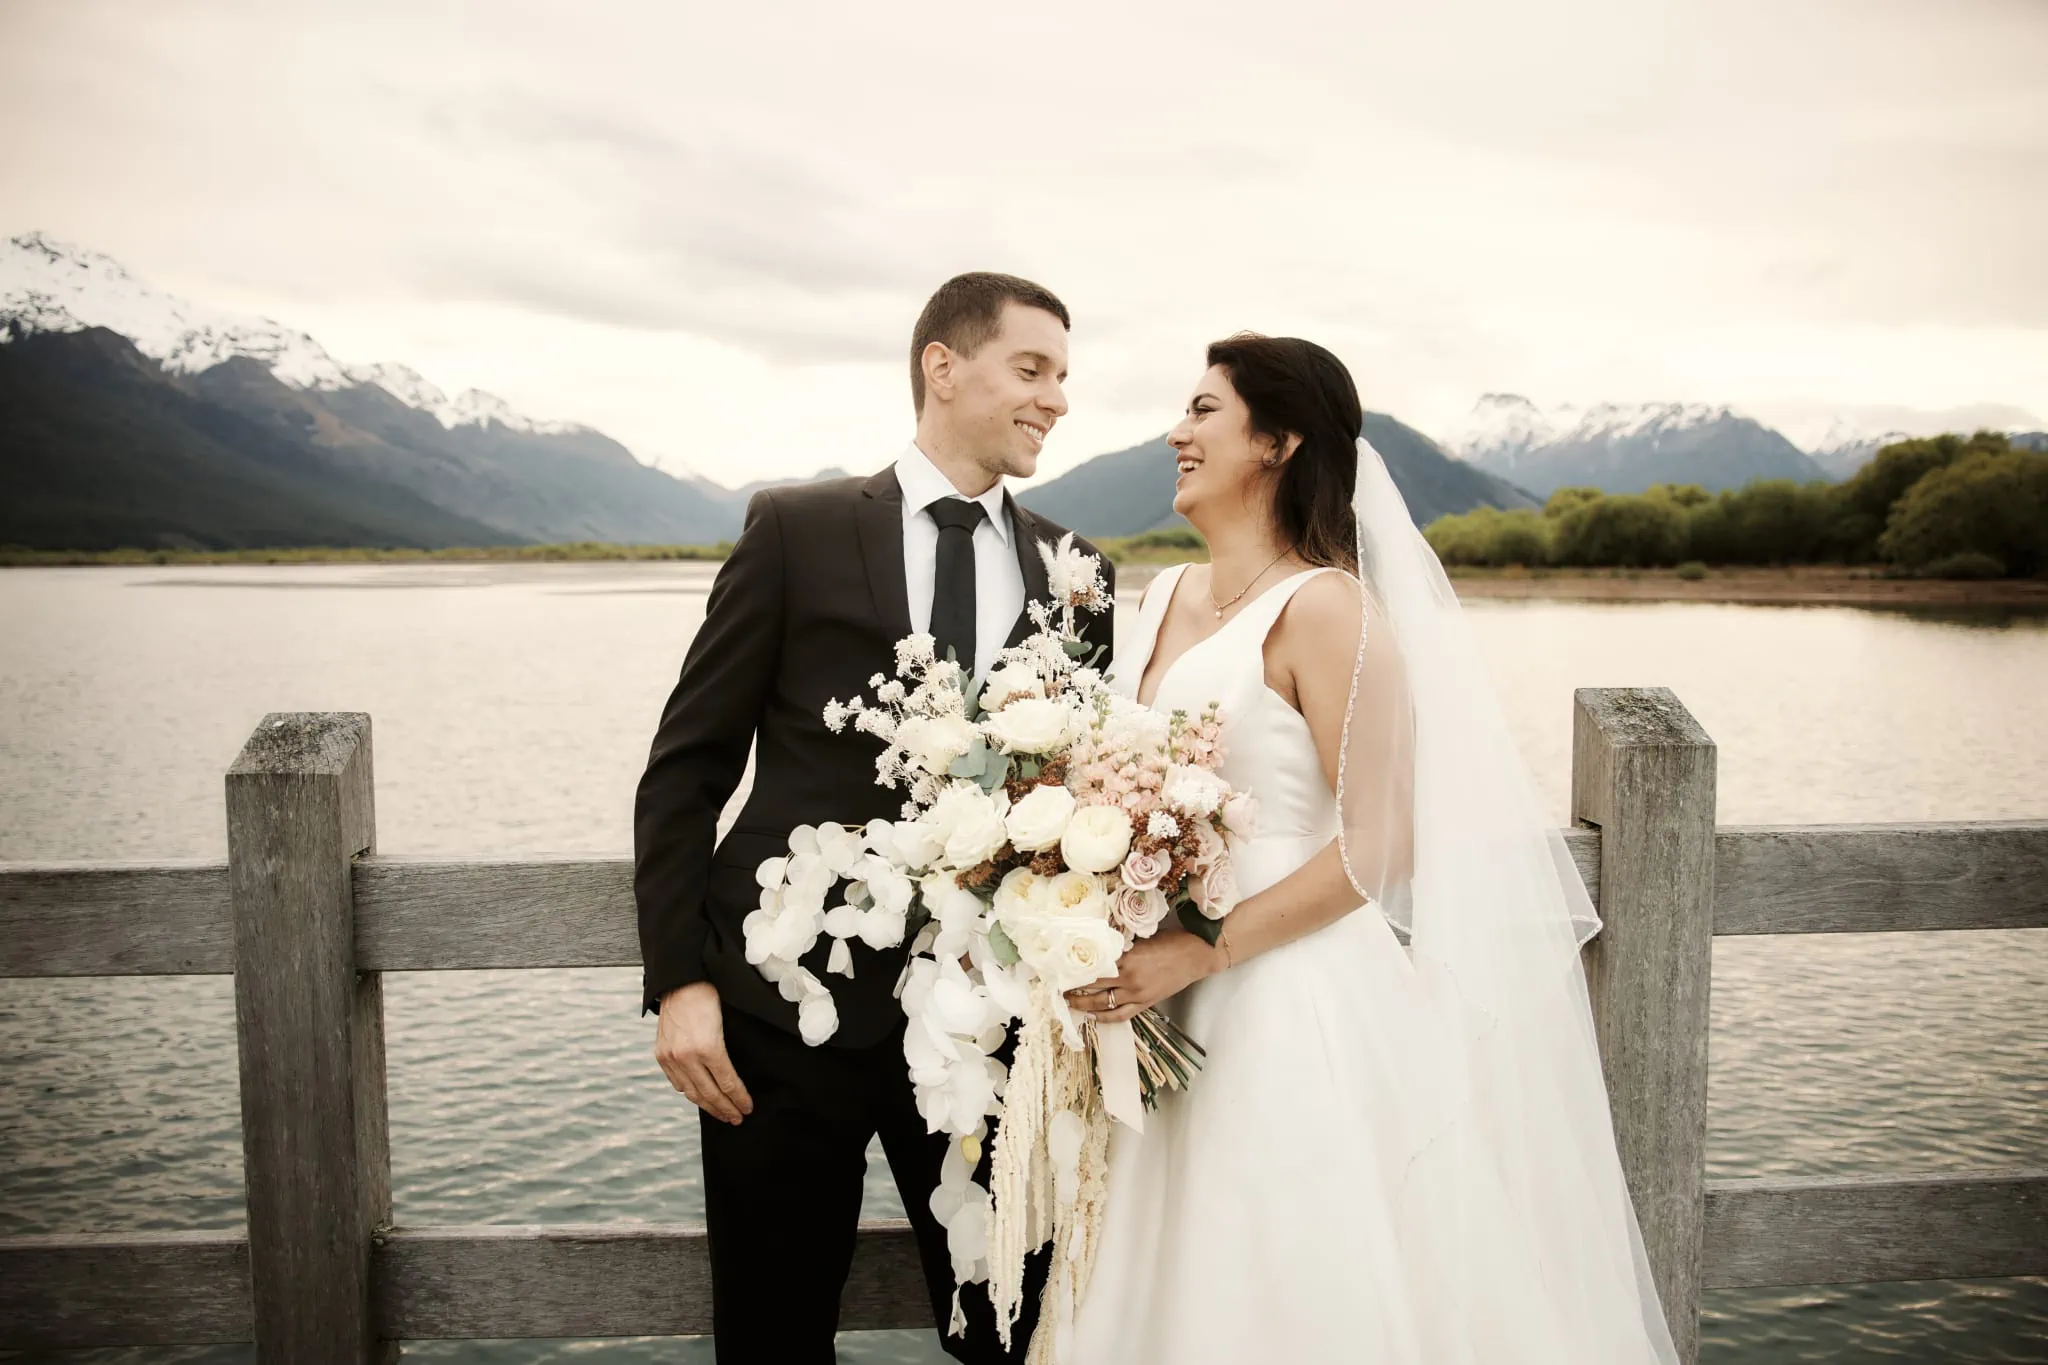 Michelle and Vedran's Rees Valley Station elopement wedding, with a bride and groom standing next to a lake with mountains in the background.